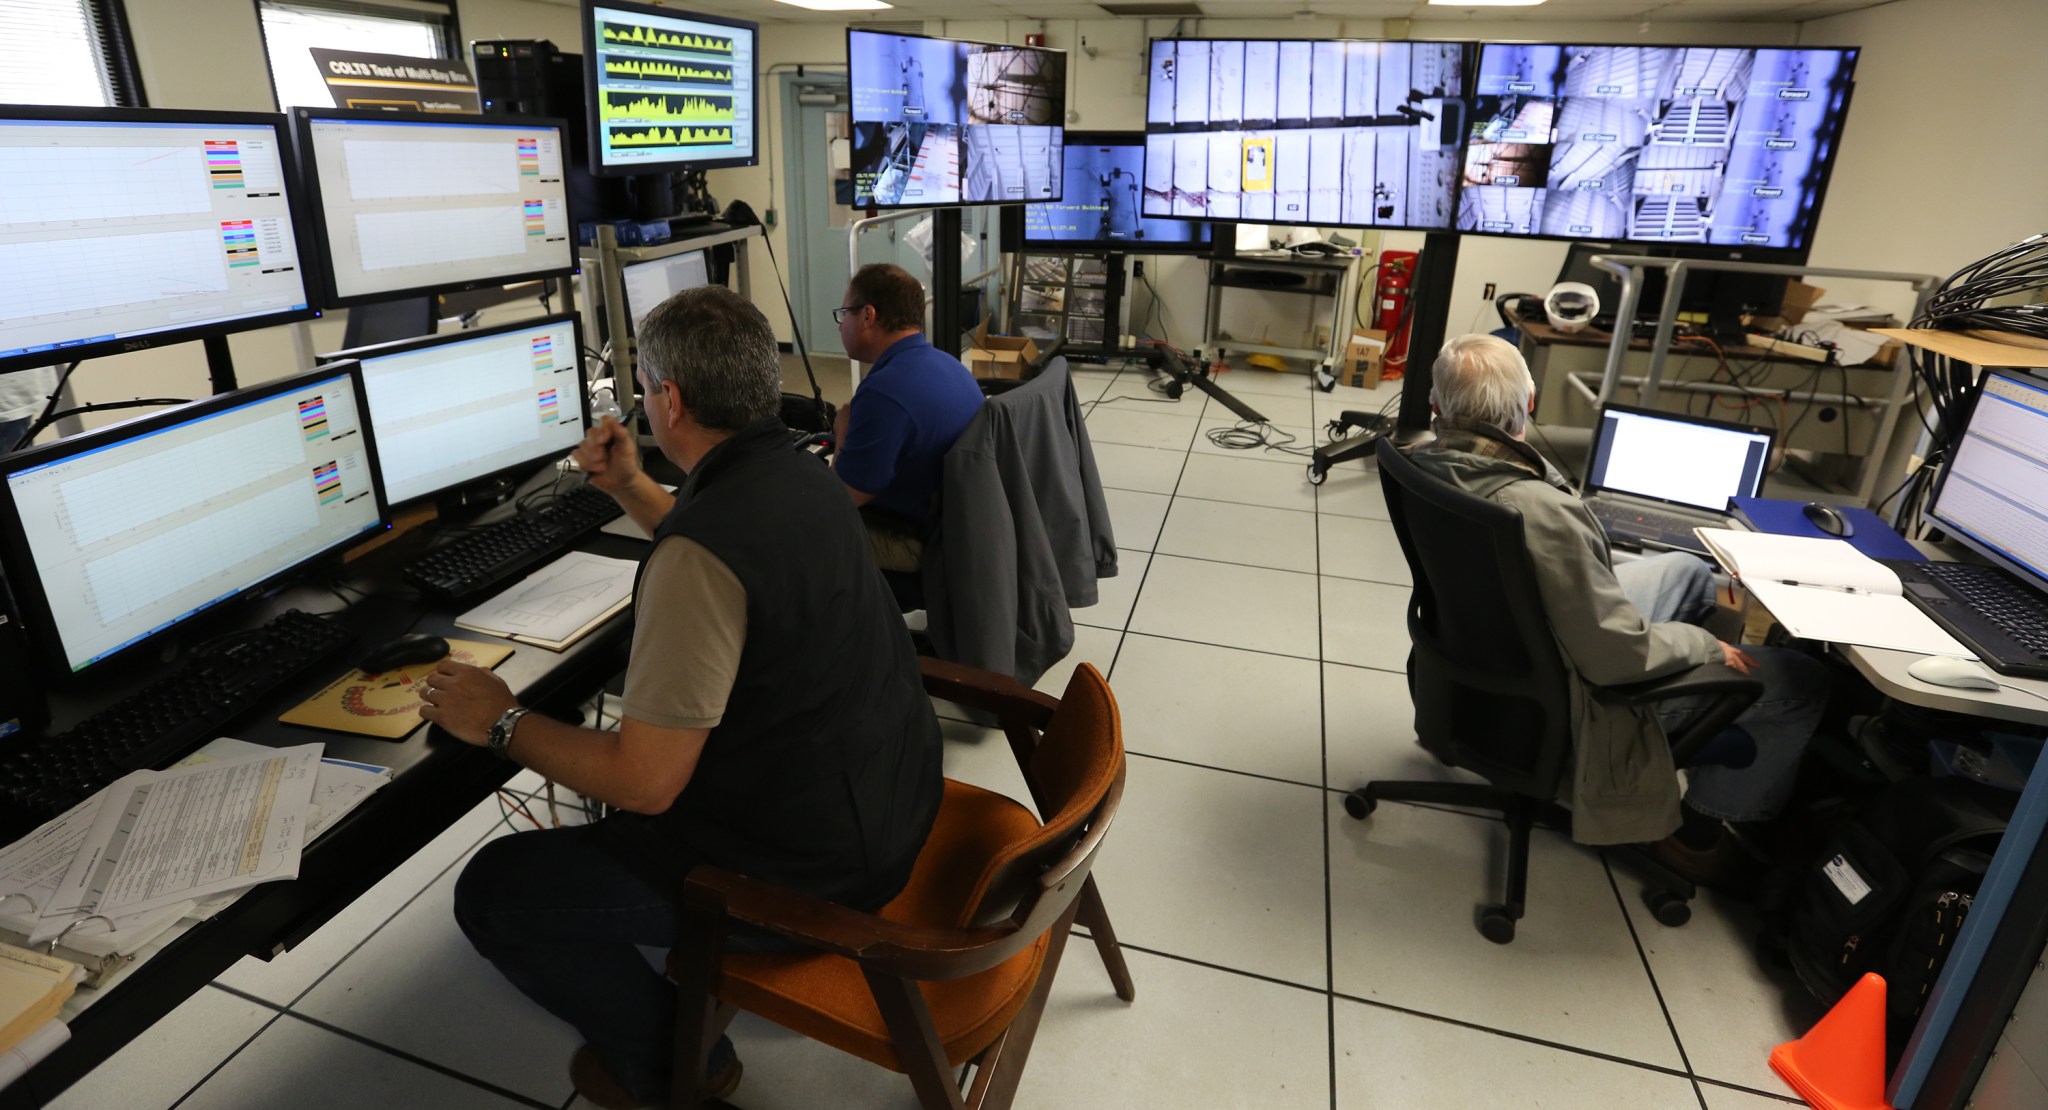 The COLTS control room team busy gathering data during the middle of a test run.